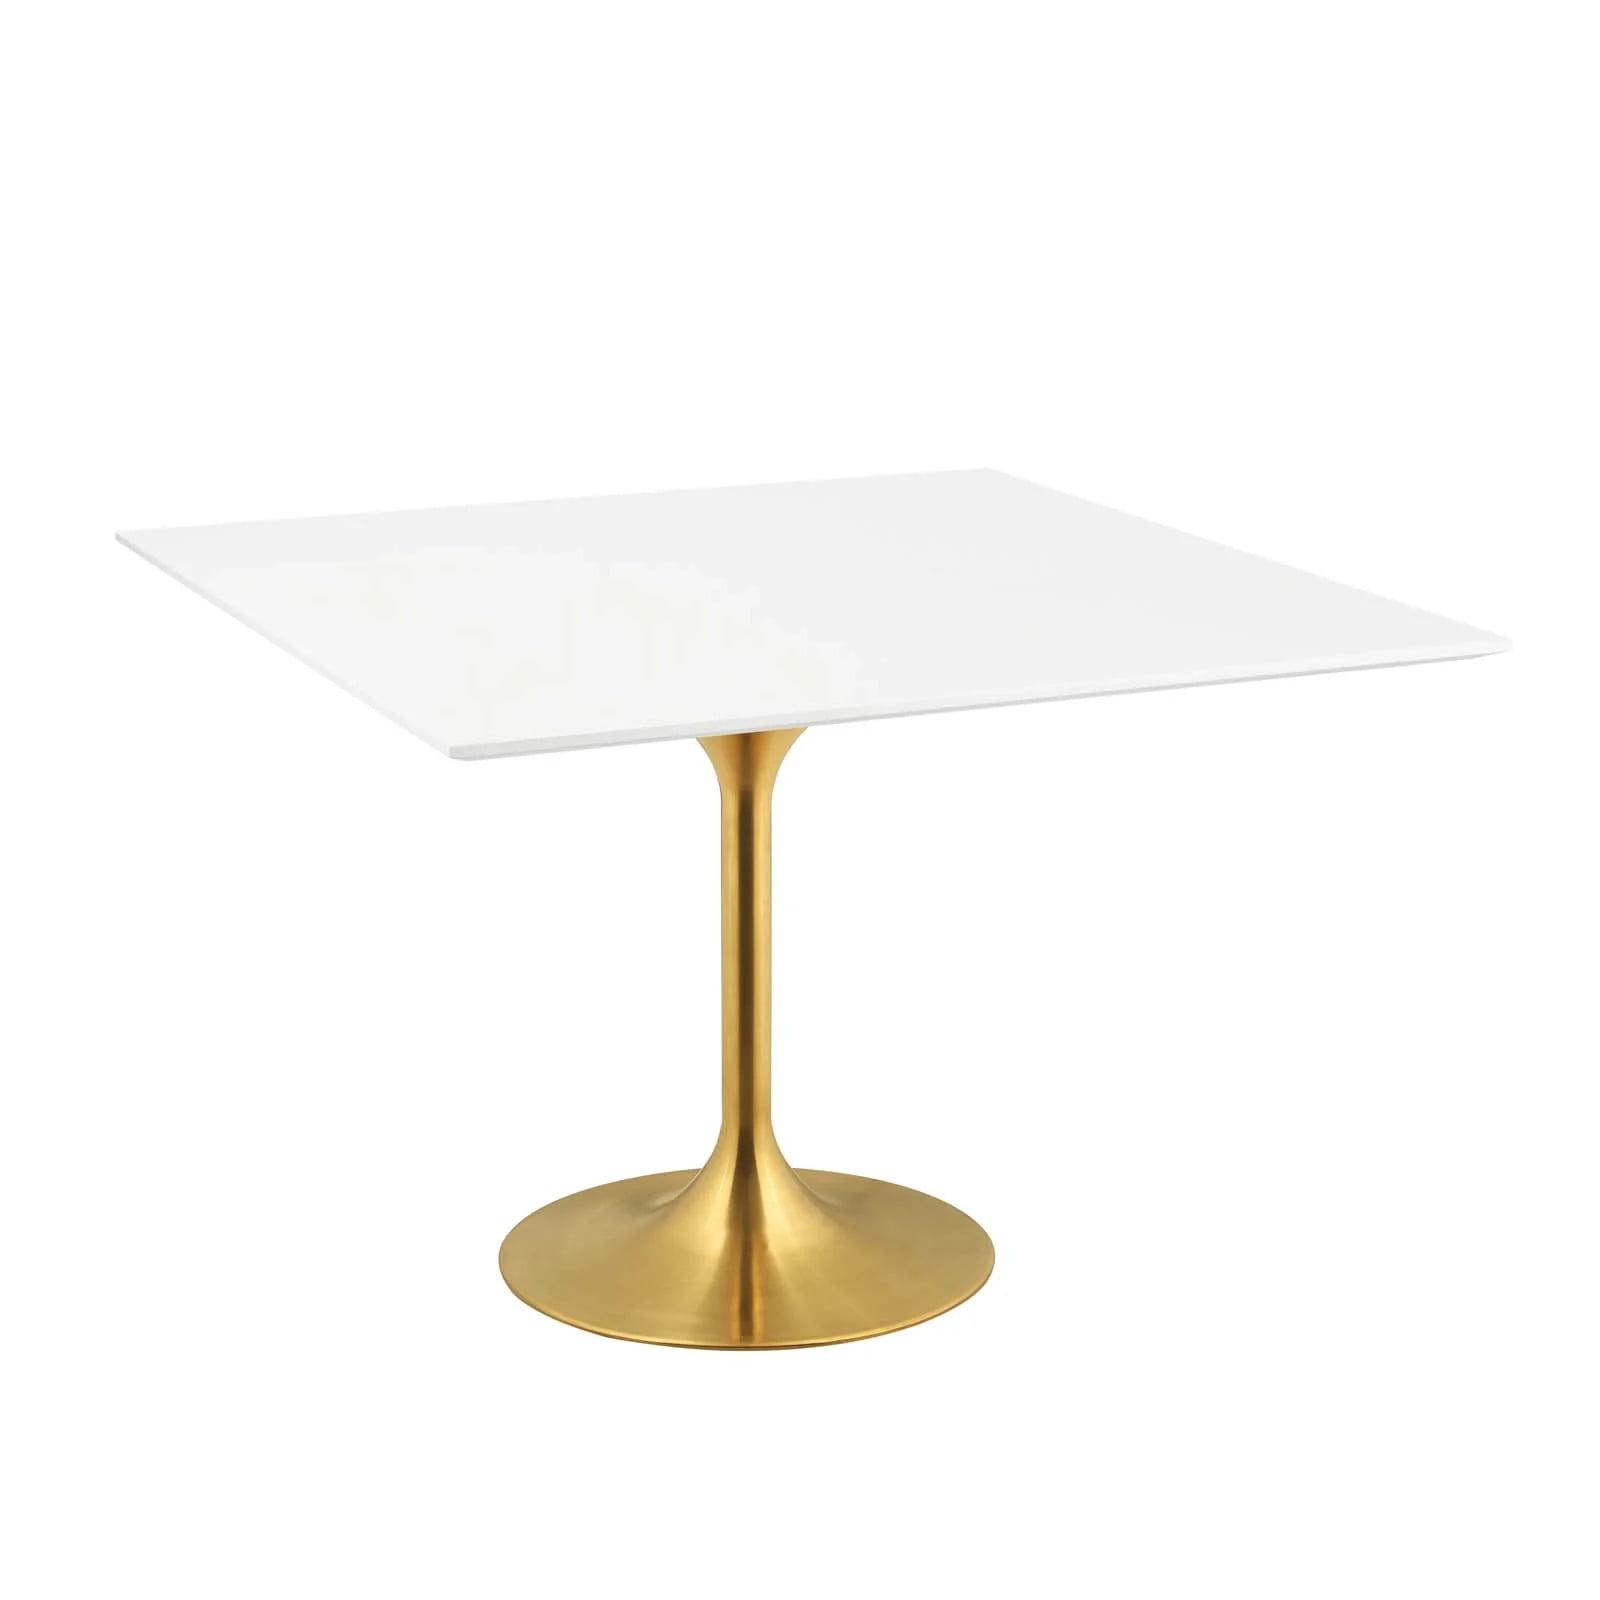 Contemporary 47" Square Mid-Century Modern Dining Table in Gold White